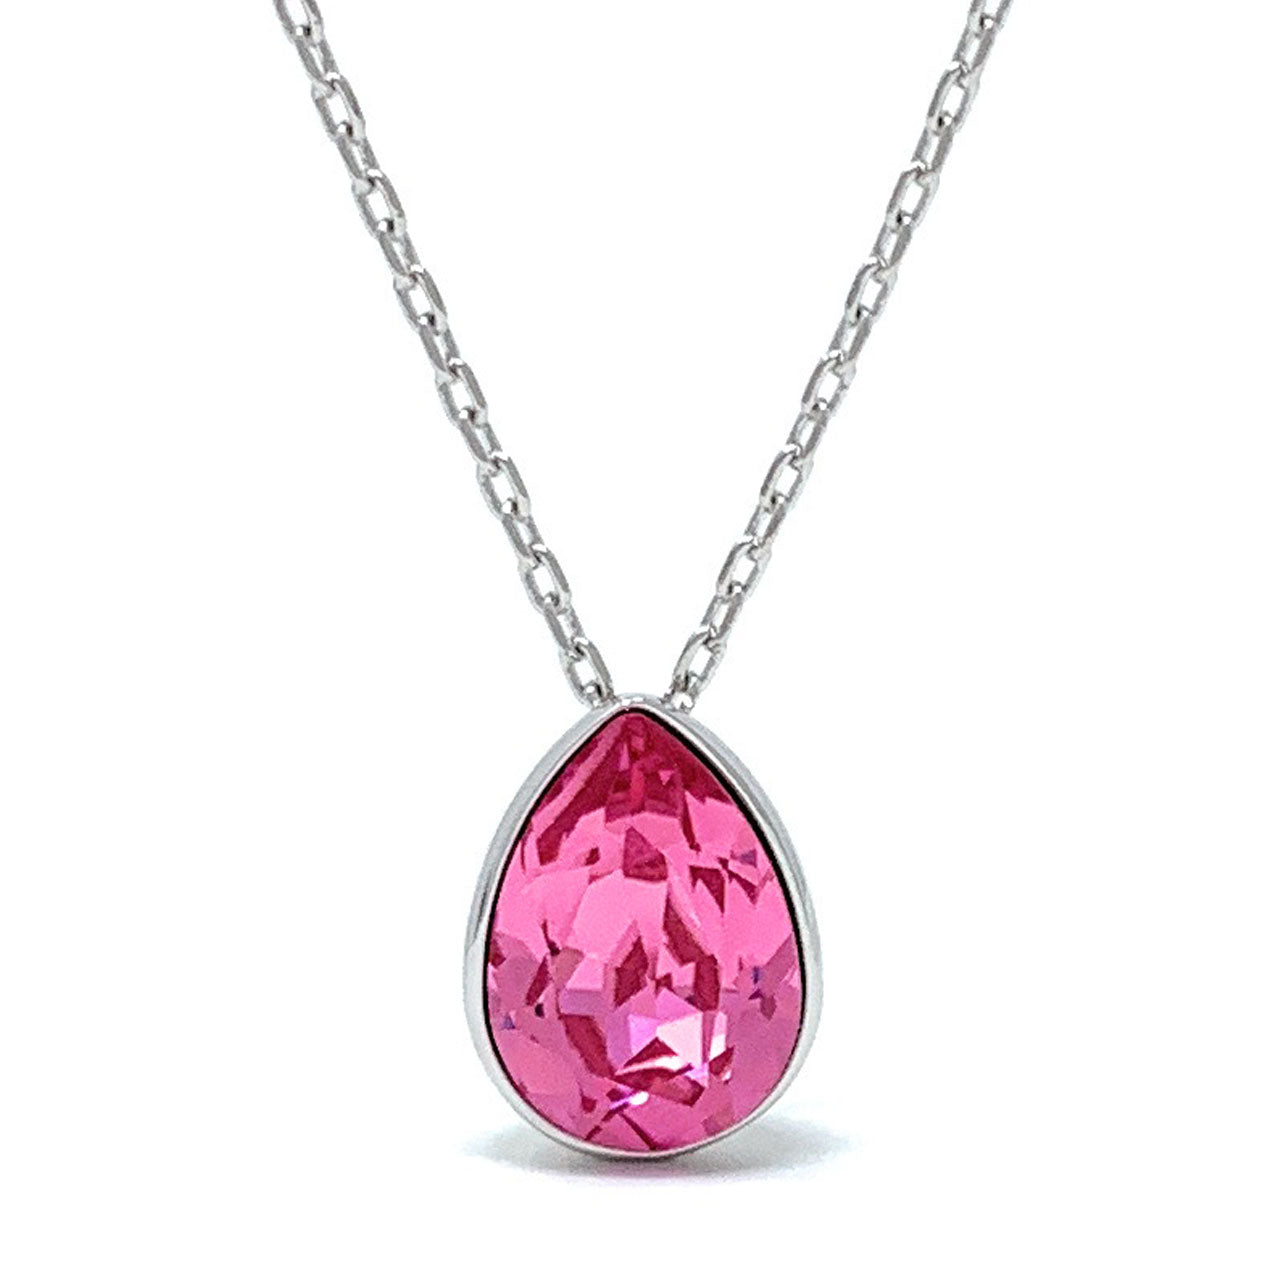 Mary Pendant Necklace with Pink Rose Drop Crystals from Swarovski Silver Toned Rhodium Plated - Ed Heart